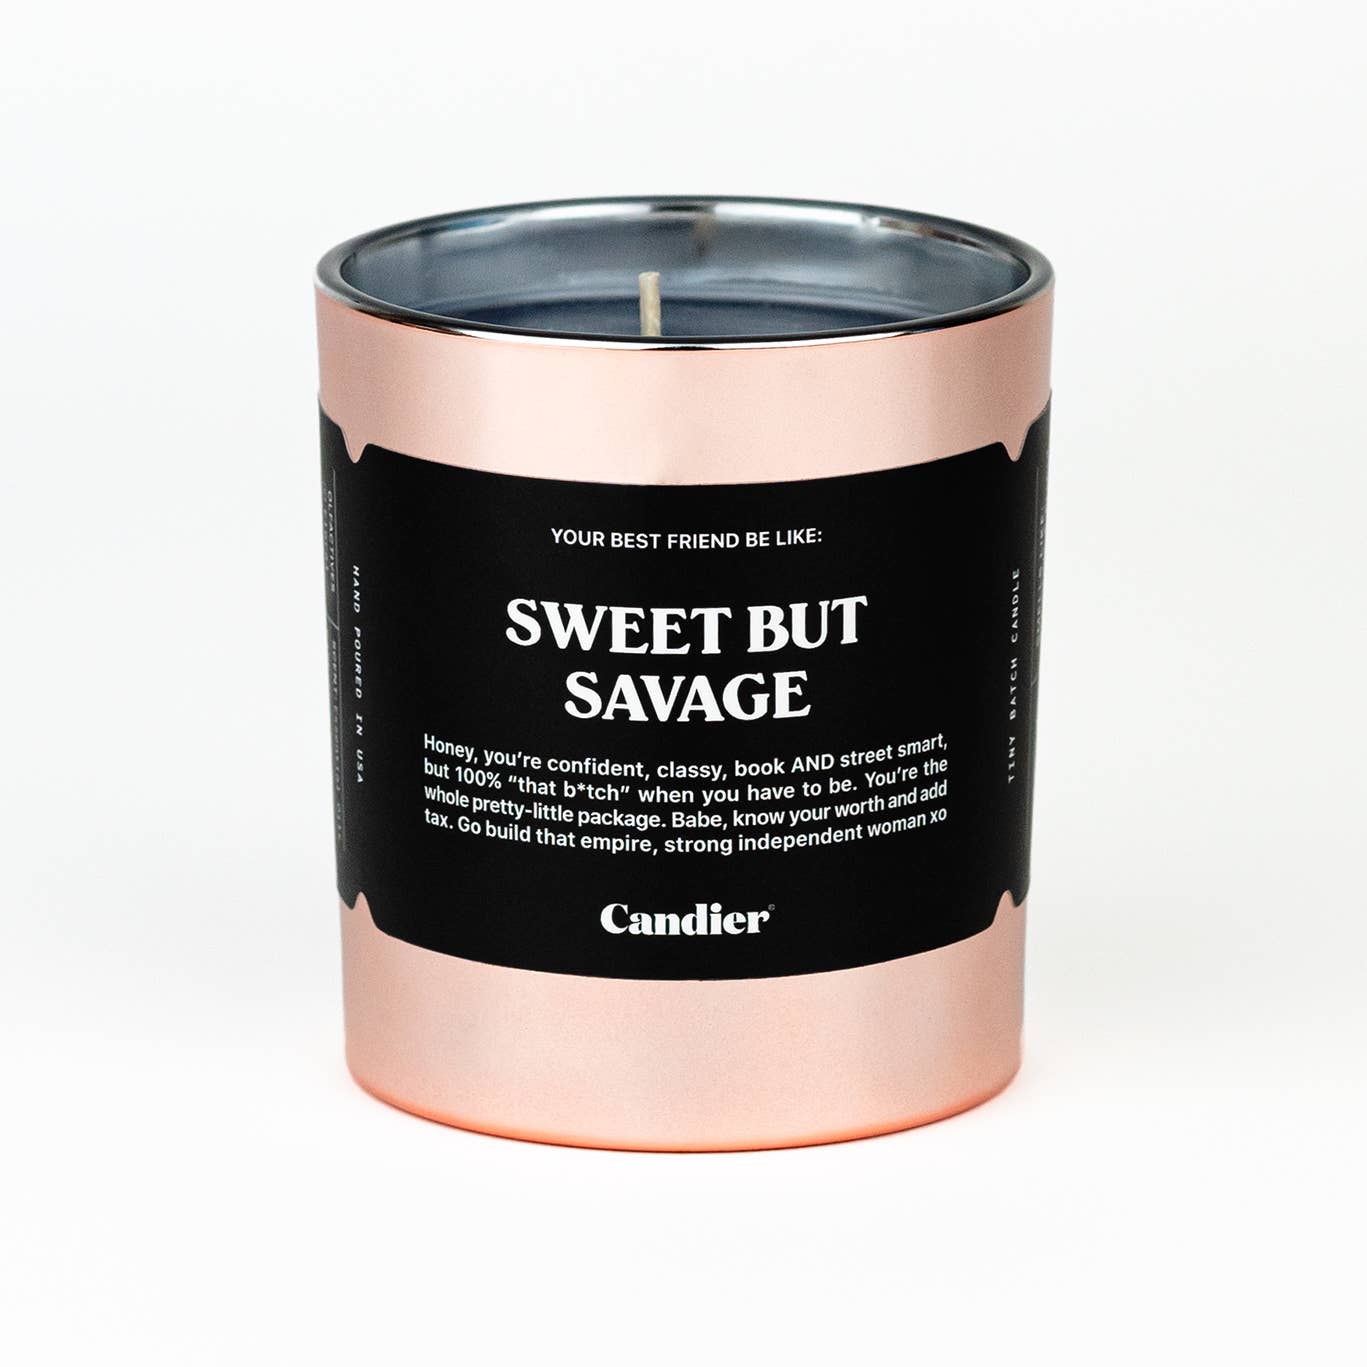 Sweet But Savage Candier 9oz Soy Candle